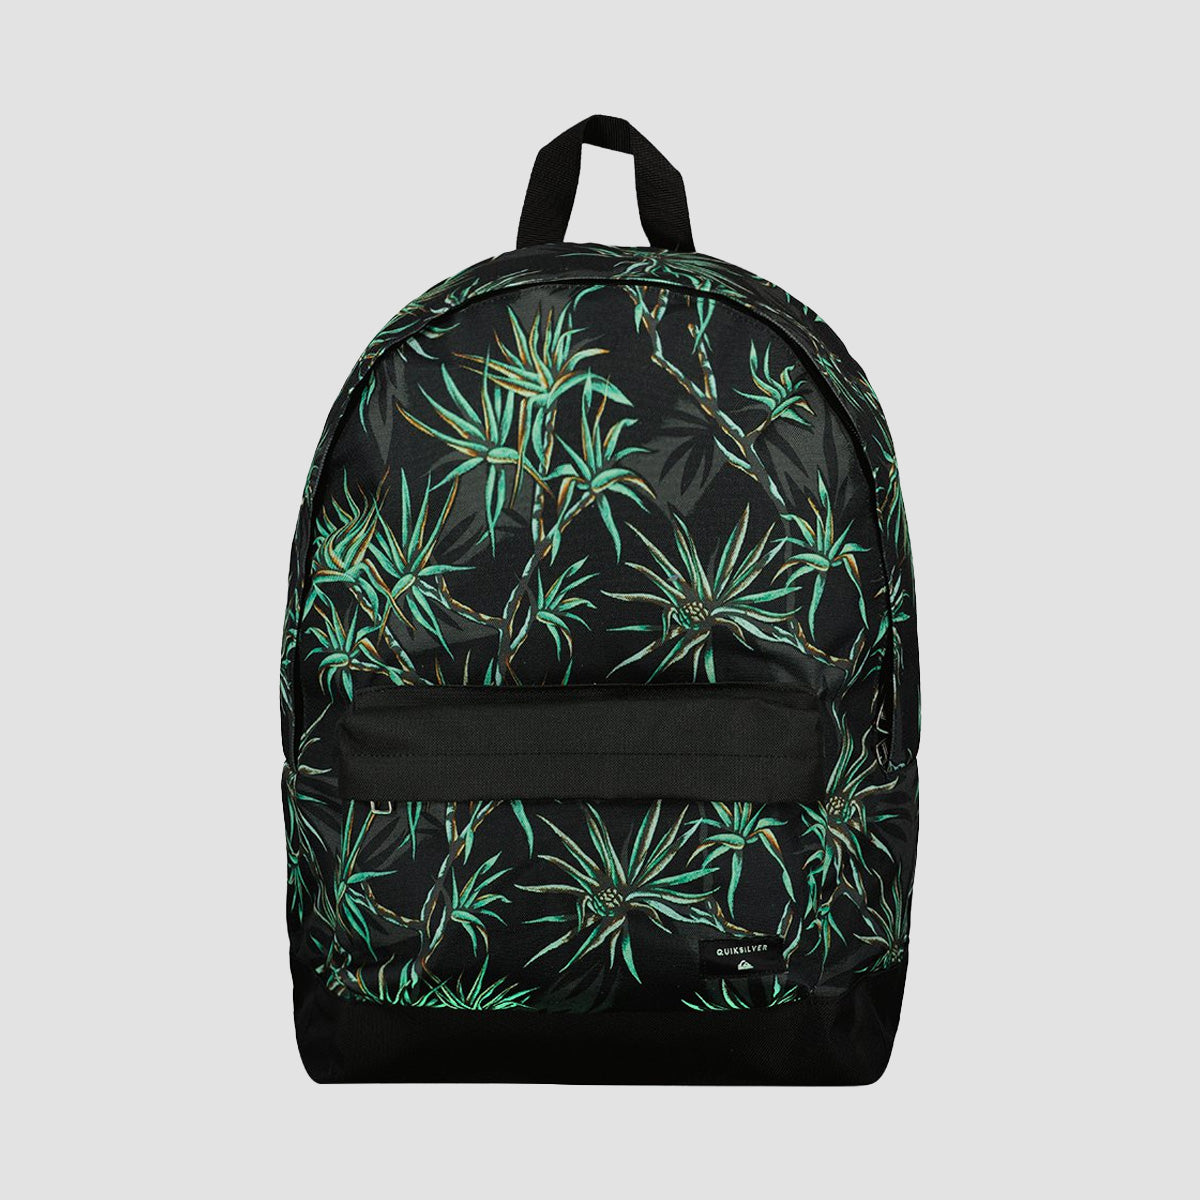 Quiksilver Salty Palm New Backpack Black